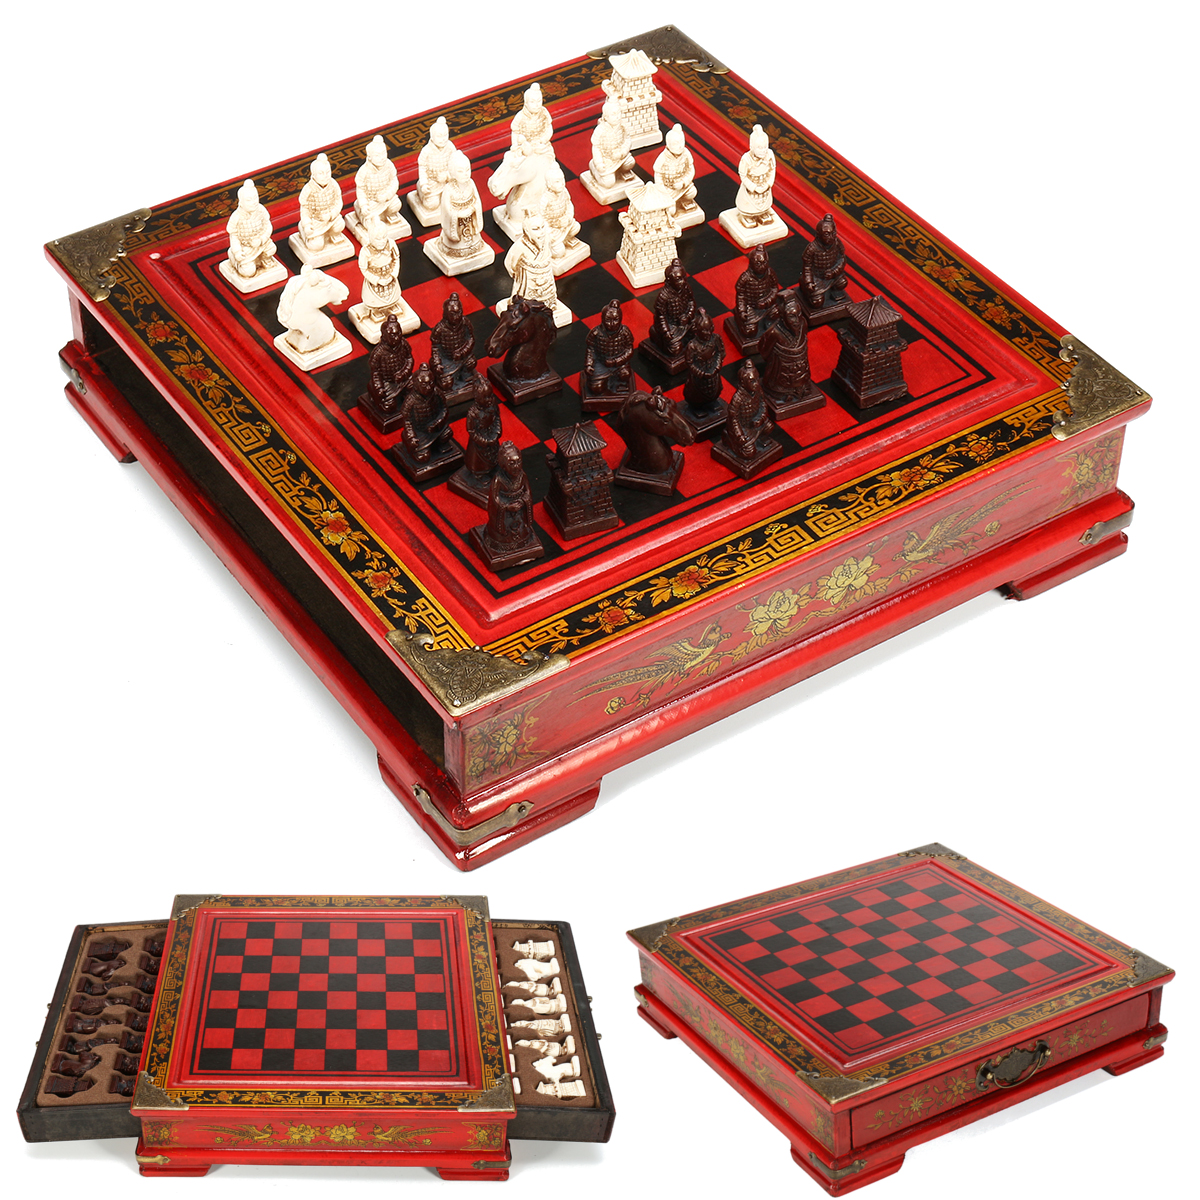 Foldable Vintage Chinese Chess Set Board Game Wood Chess Pieces Collectibles 